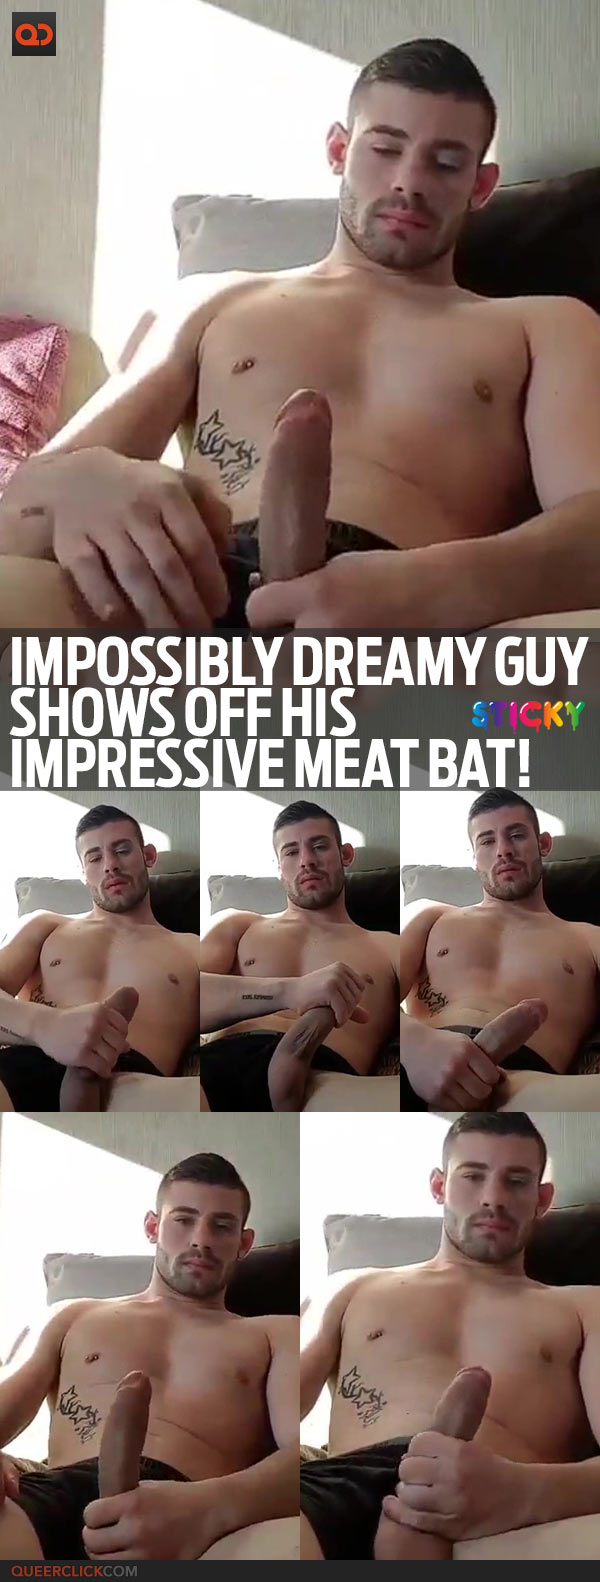 Impossibly Dreamy Guy Shows Off His Impressive Meat Bat!